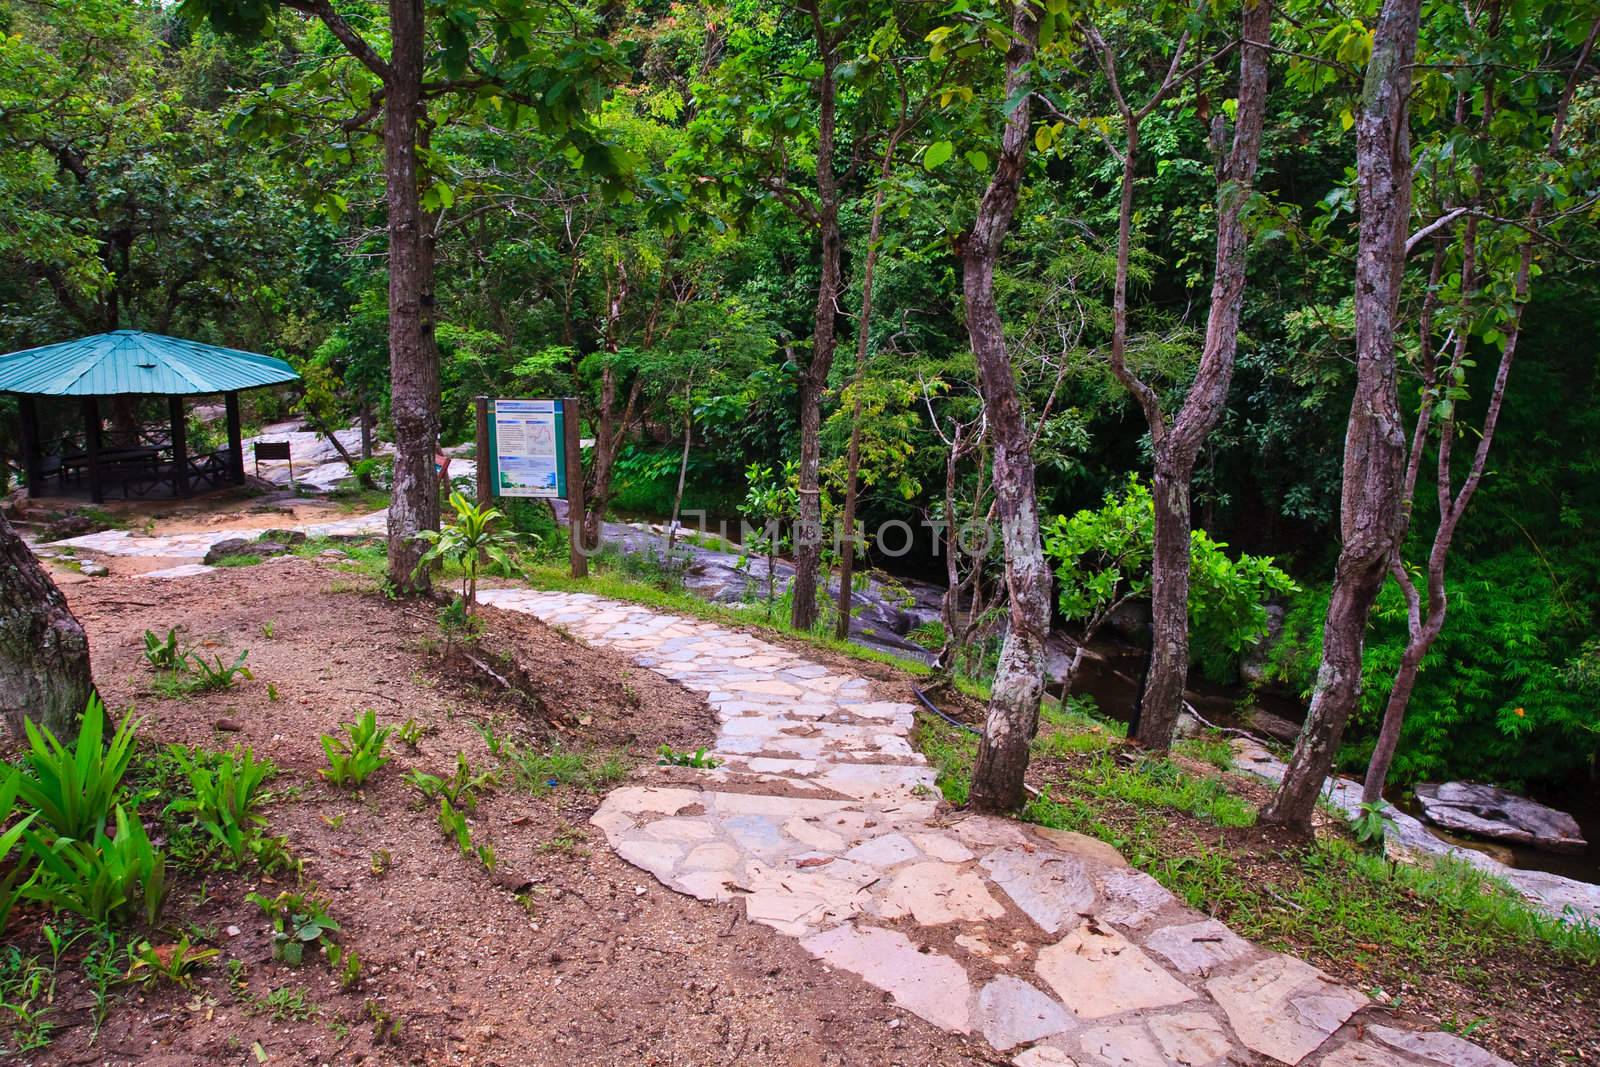 Stone walkway in forest